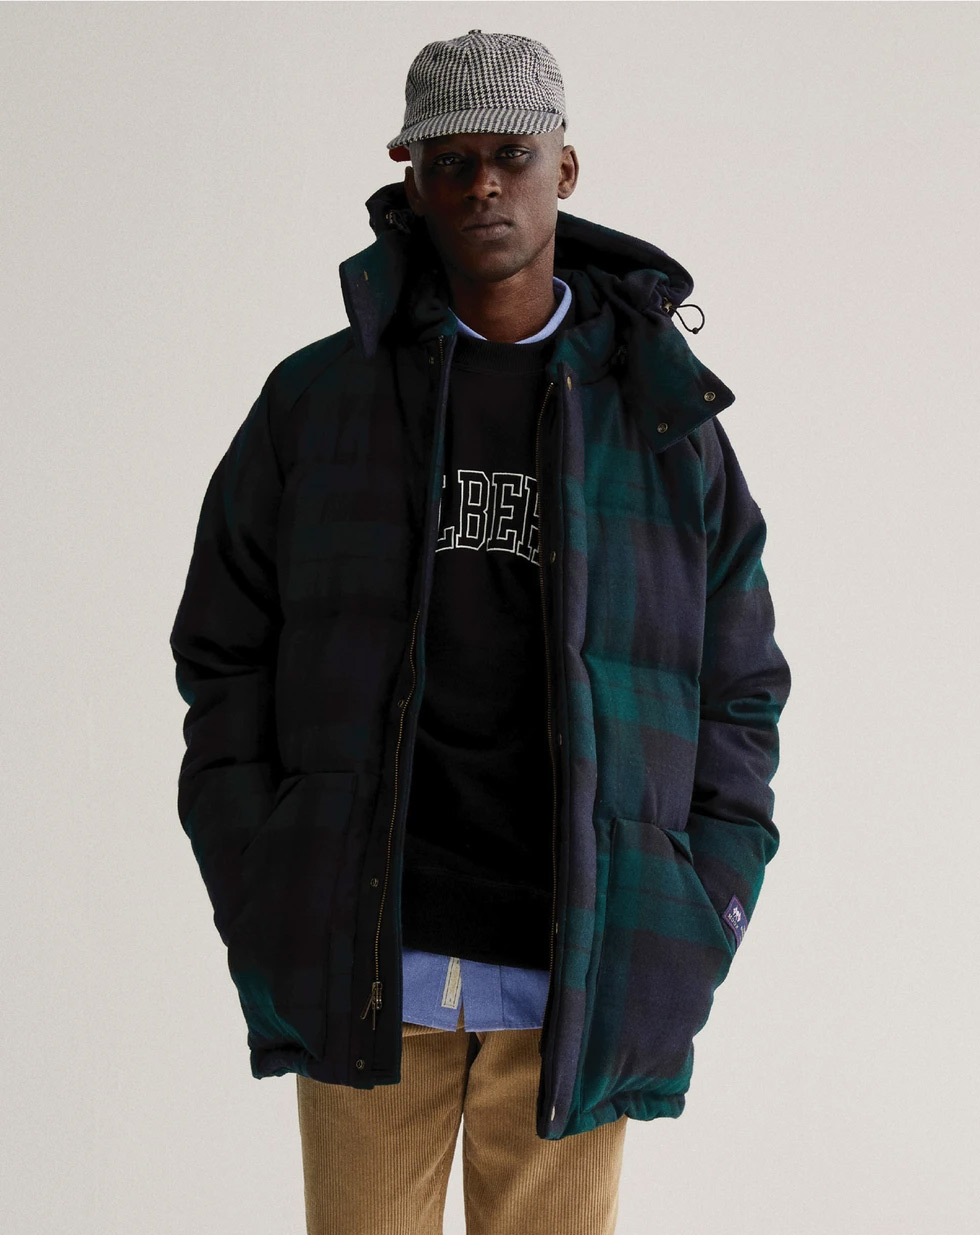 Aimé Leon Dore’s Fall/Winter 2020 Lookbook Shows How To Master The High ...